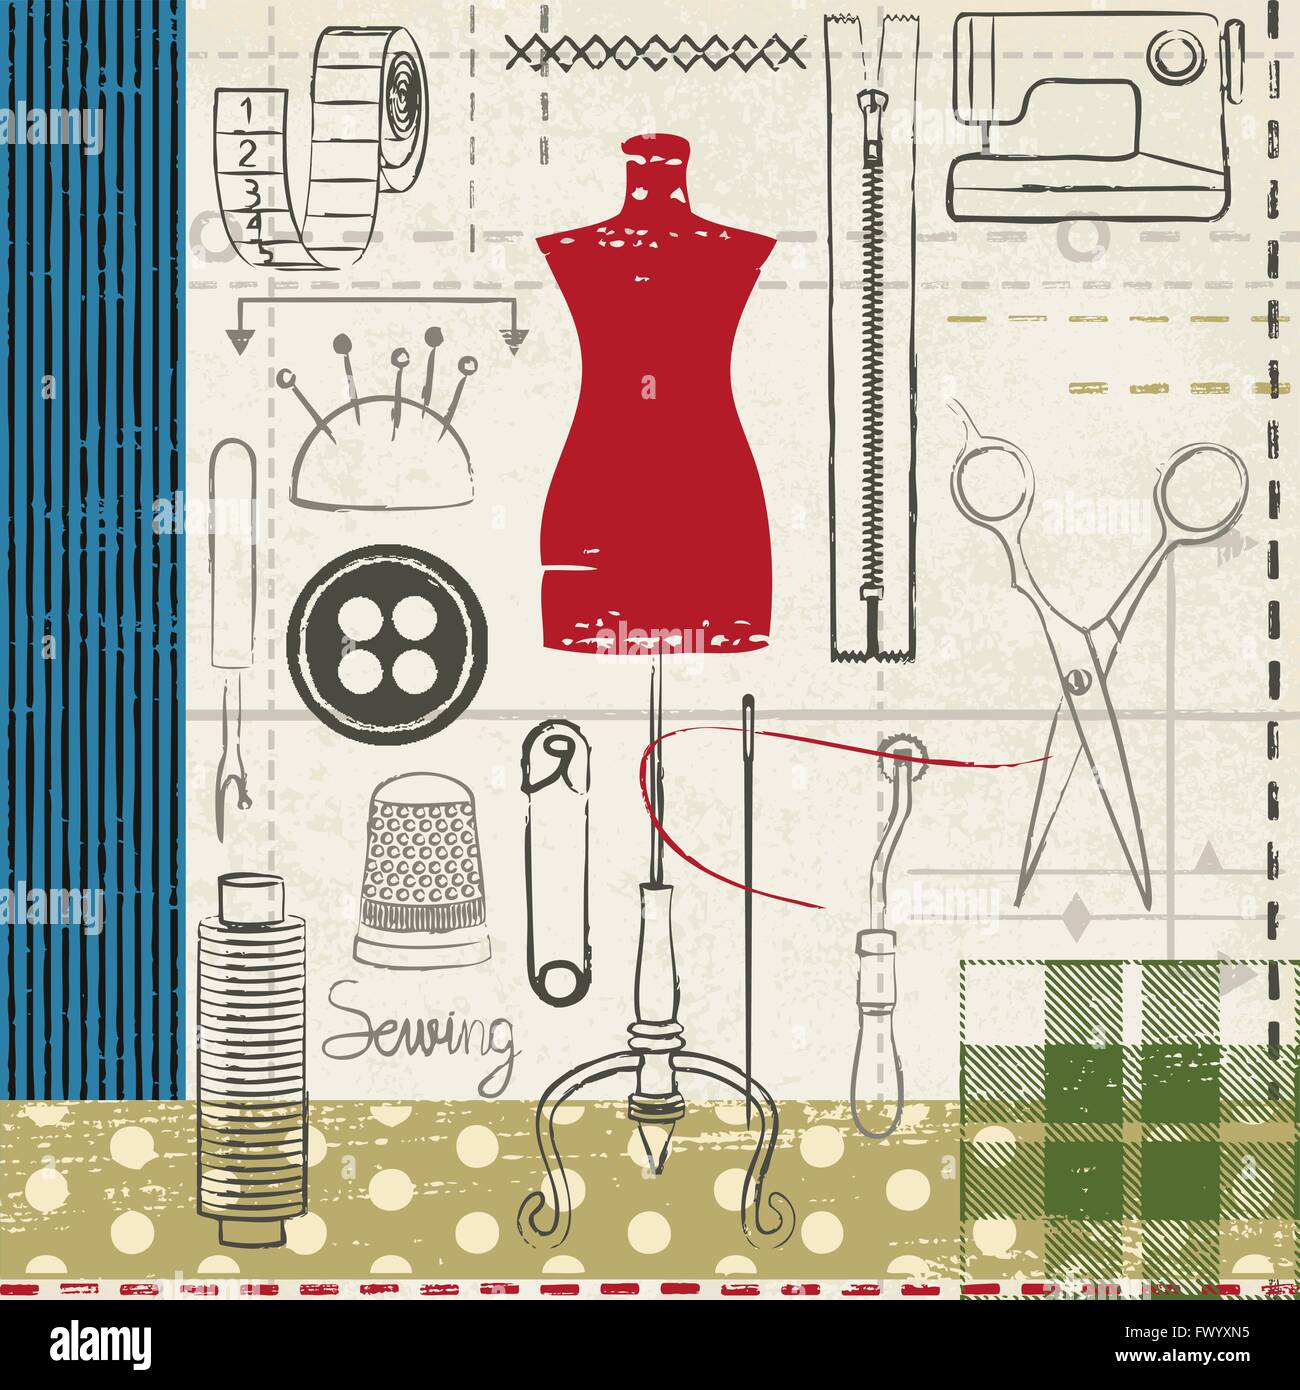 Sewing clothes Stock Vector Images - Alamy